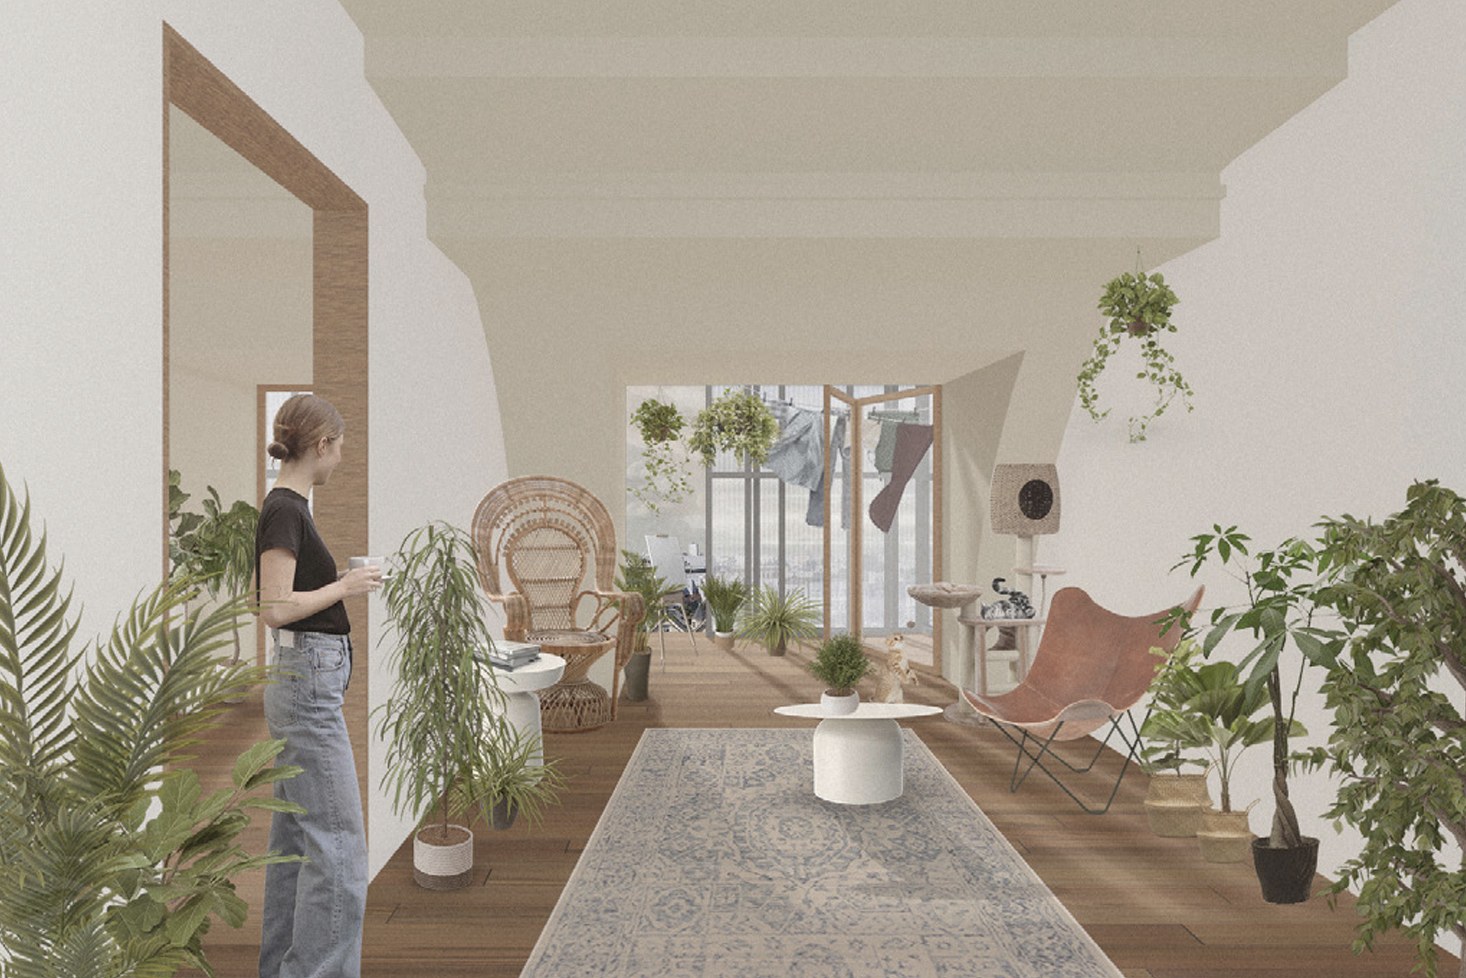 Olivia Georgakopoulos and Alyssa Barber's thesis: interior rendering of apartment